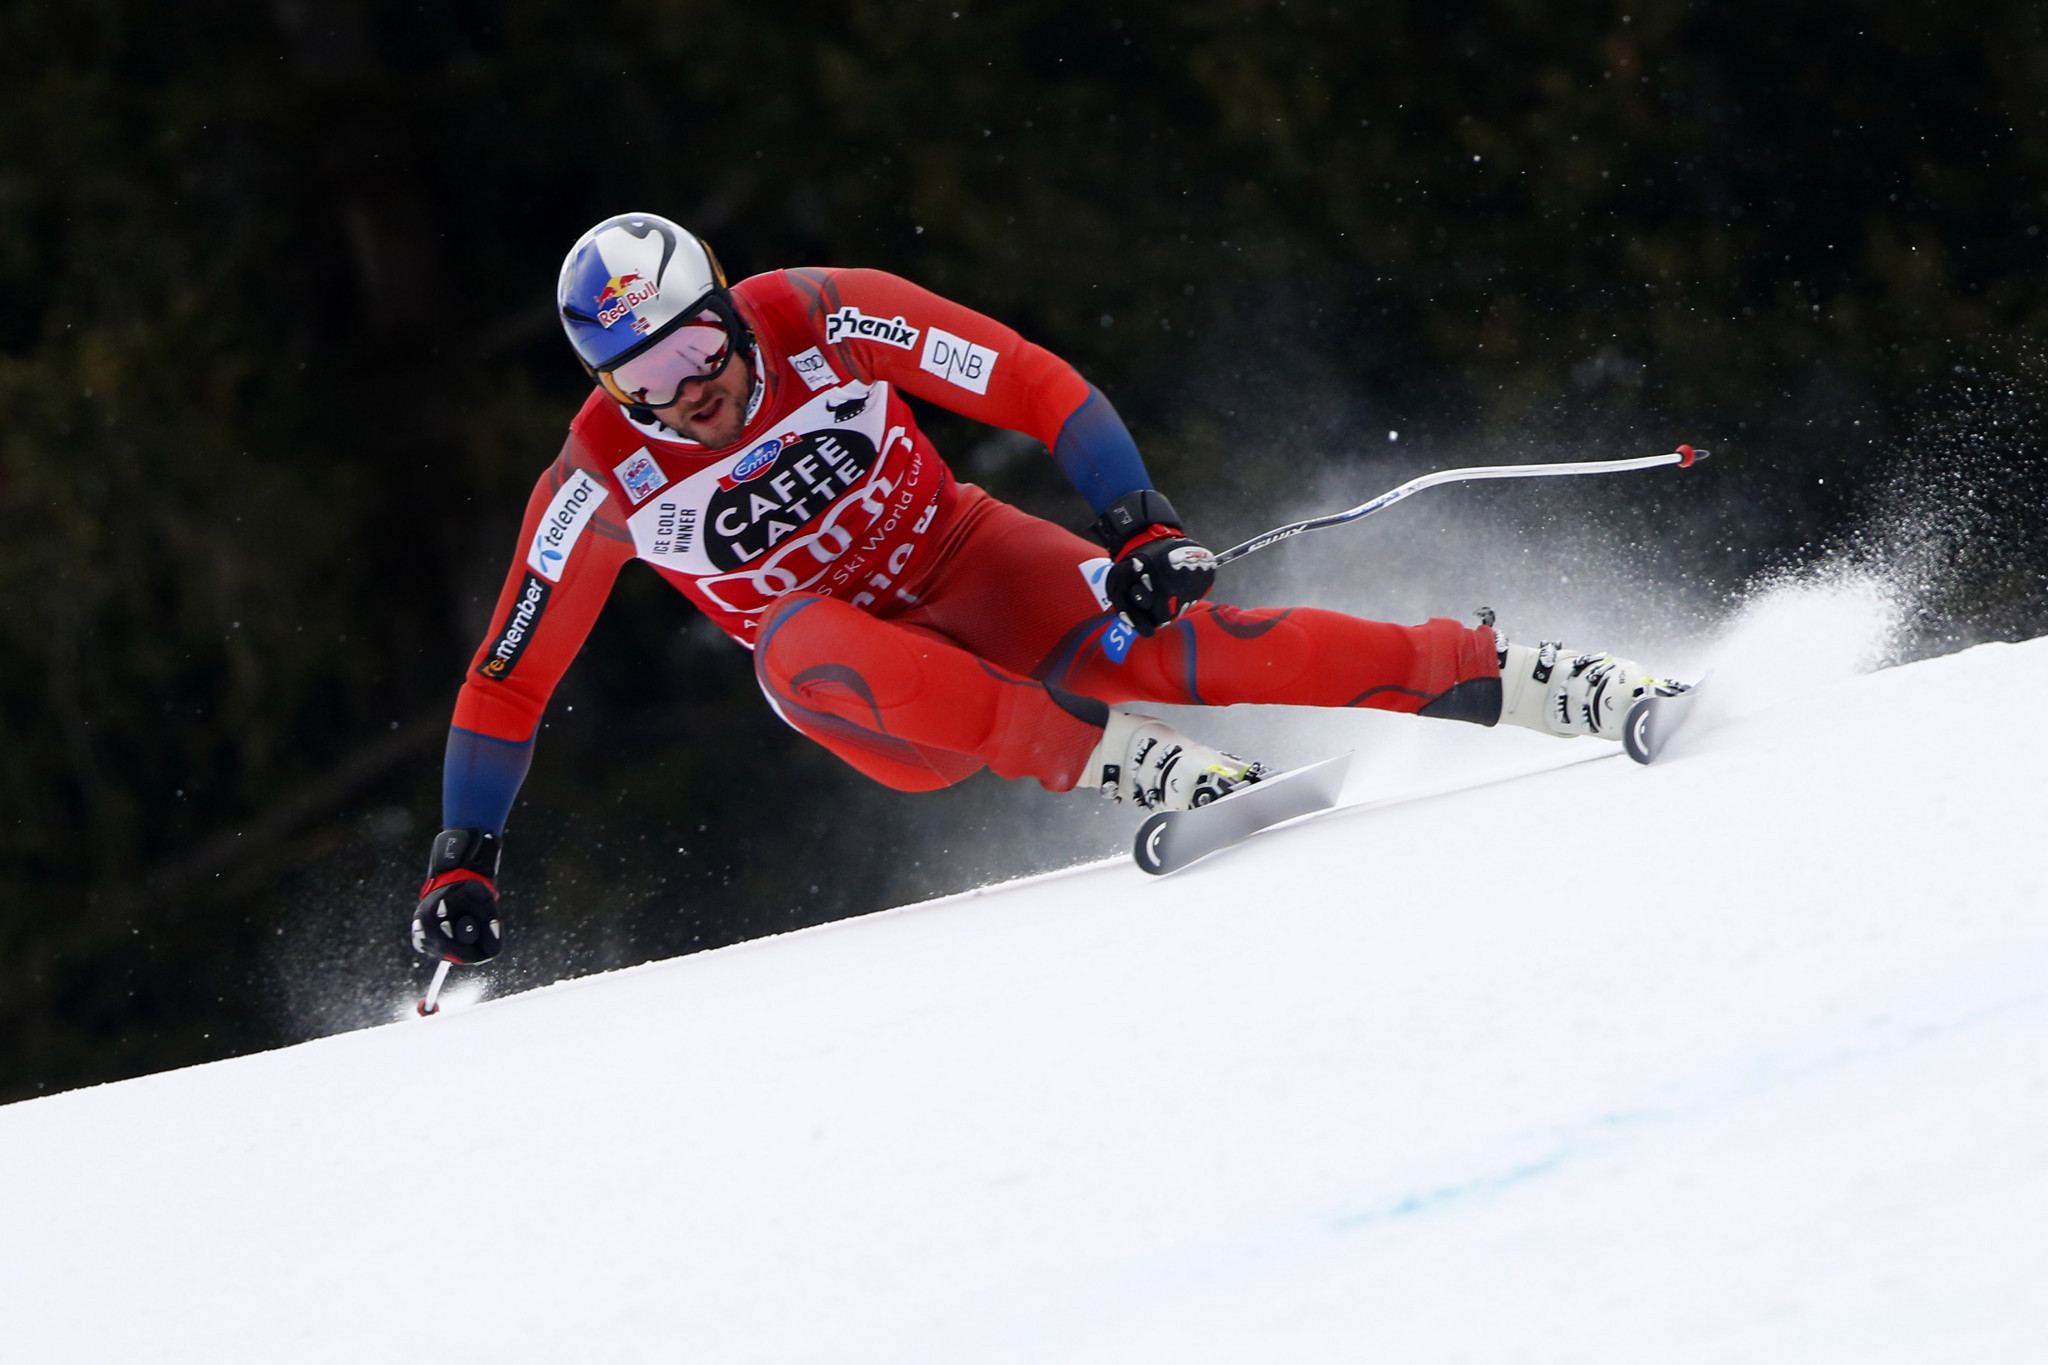 FIS Alpine World Cup season set to continue after Christmas break